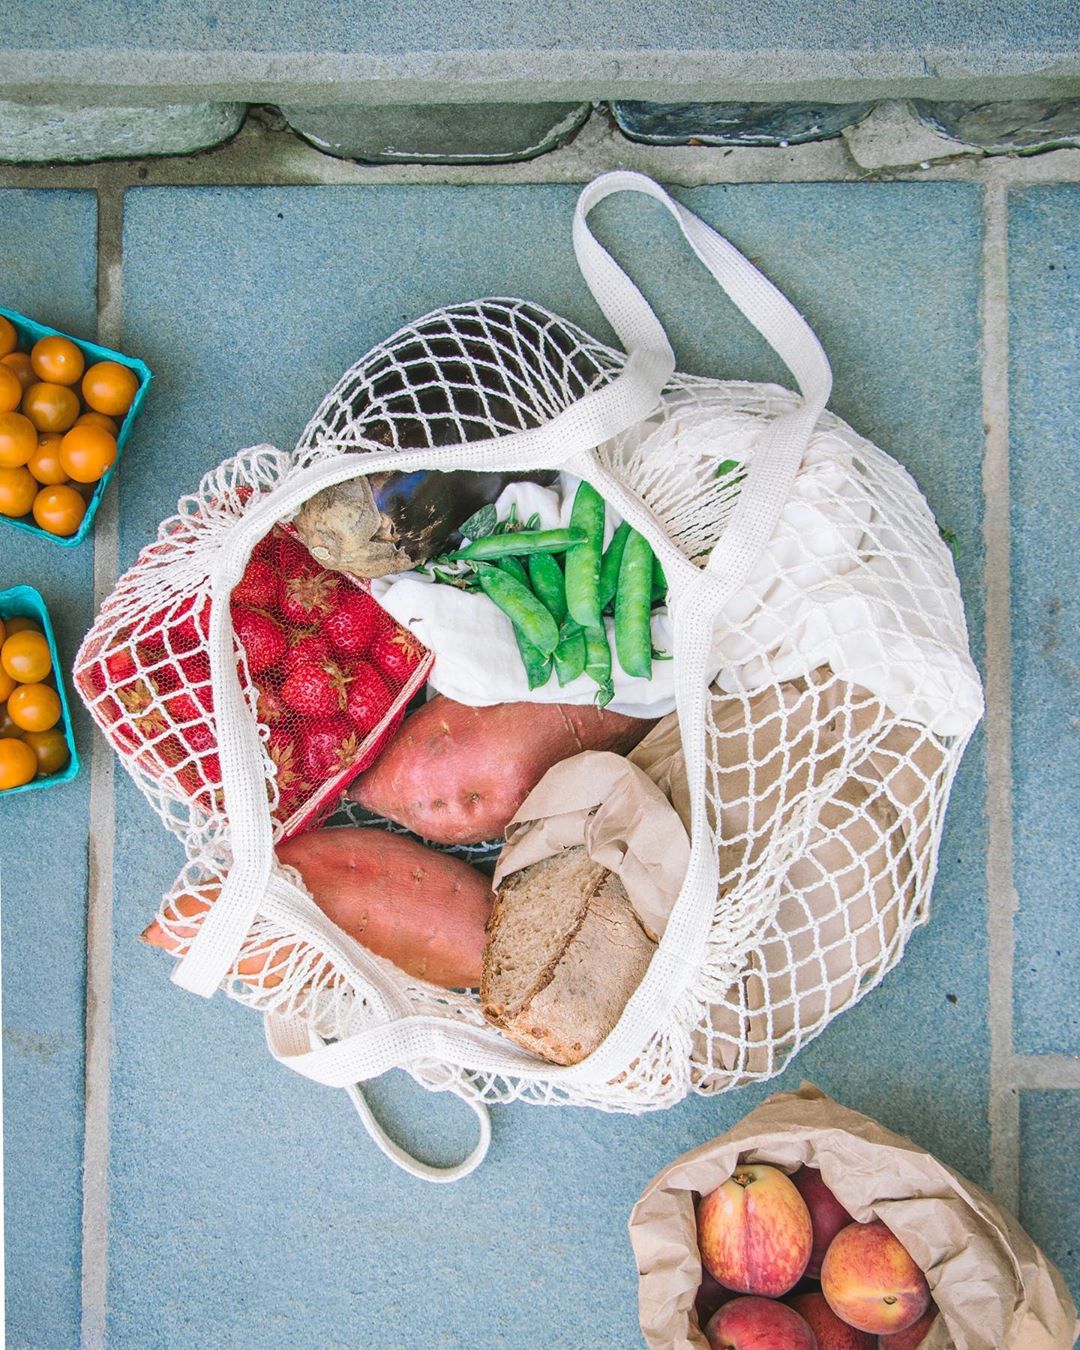 Top view, net market tote full of fresh veggies purhcased from a local farmer's market.